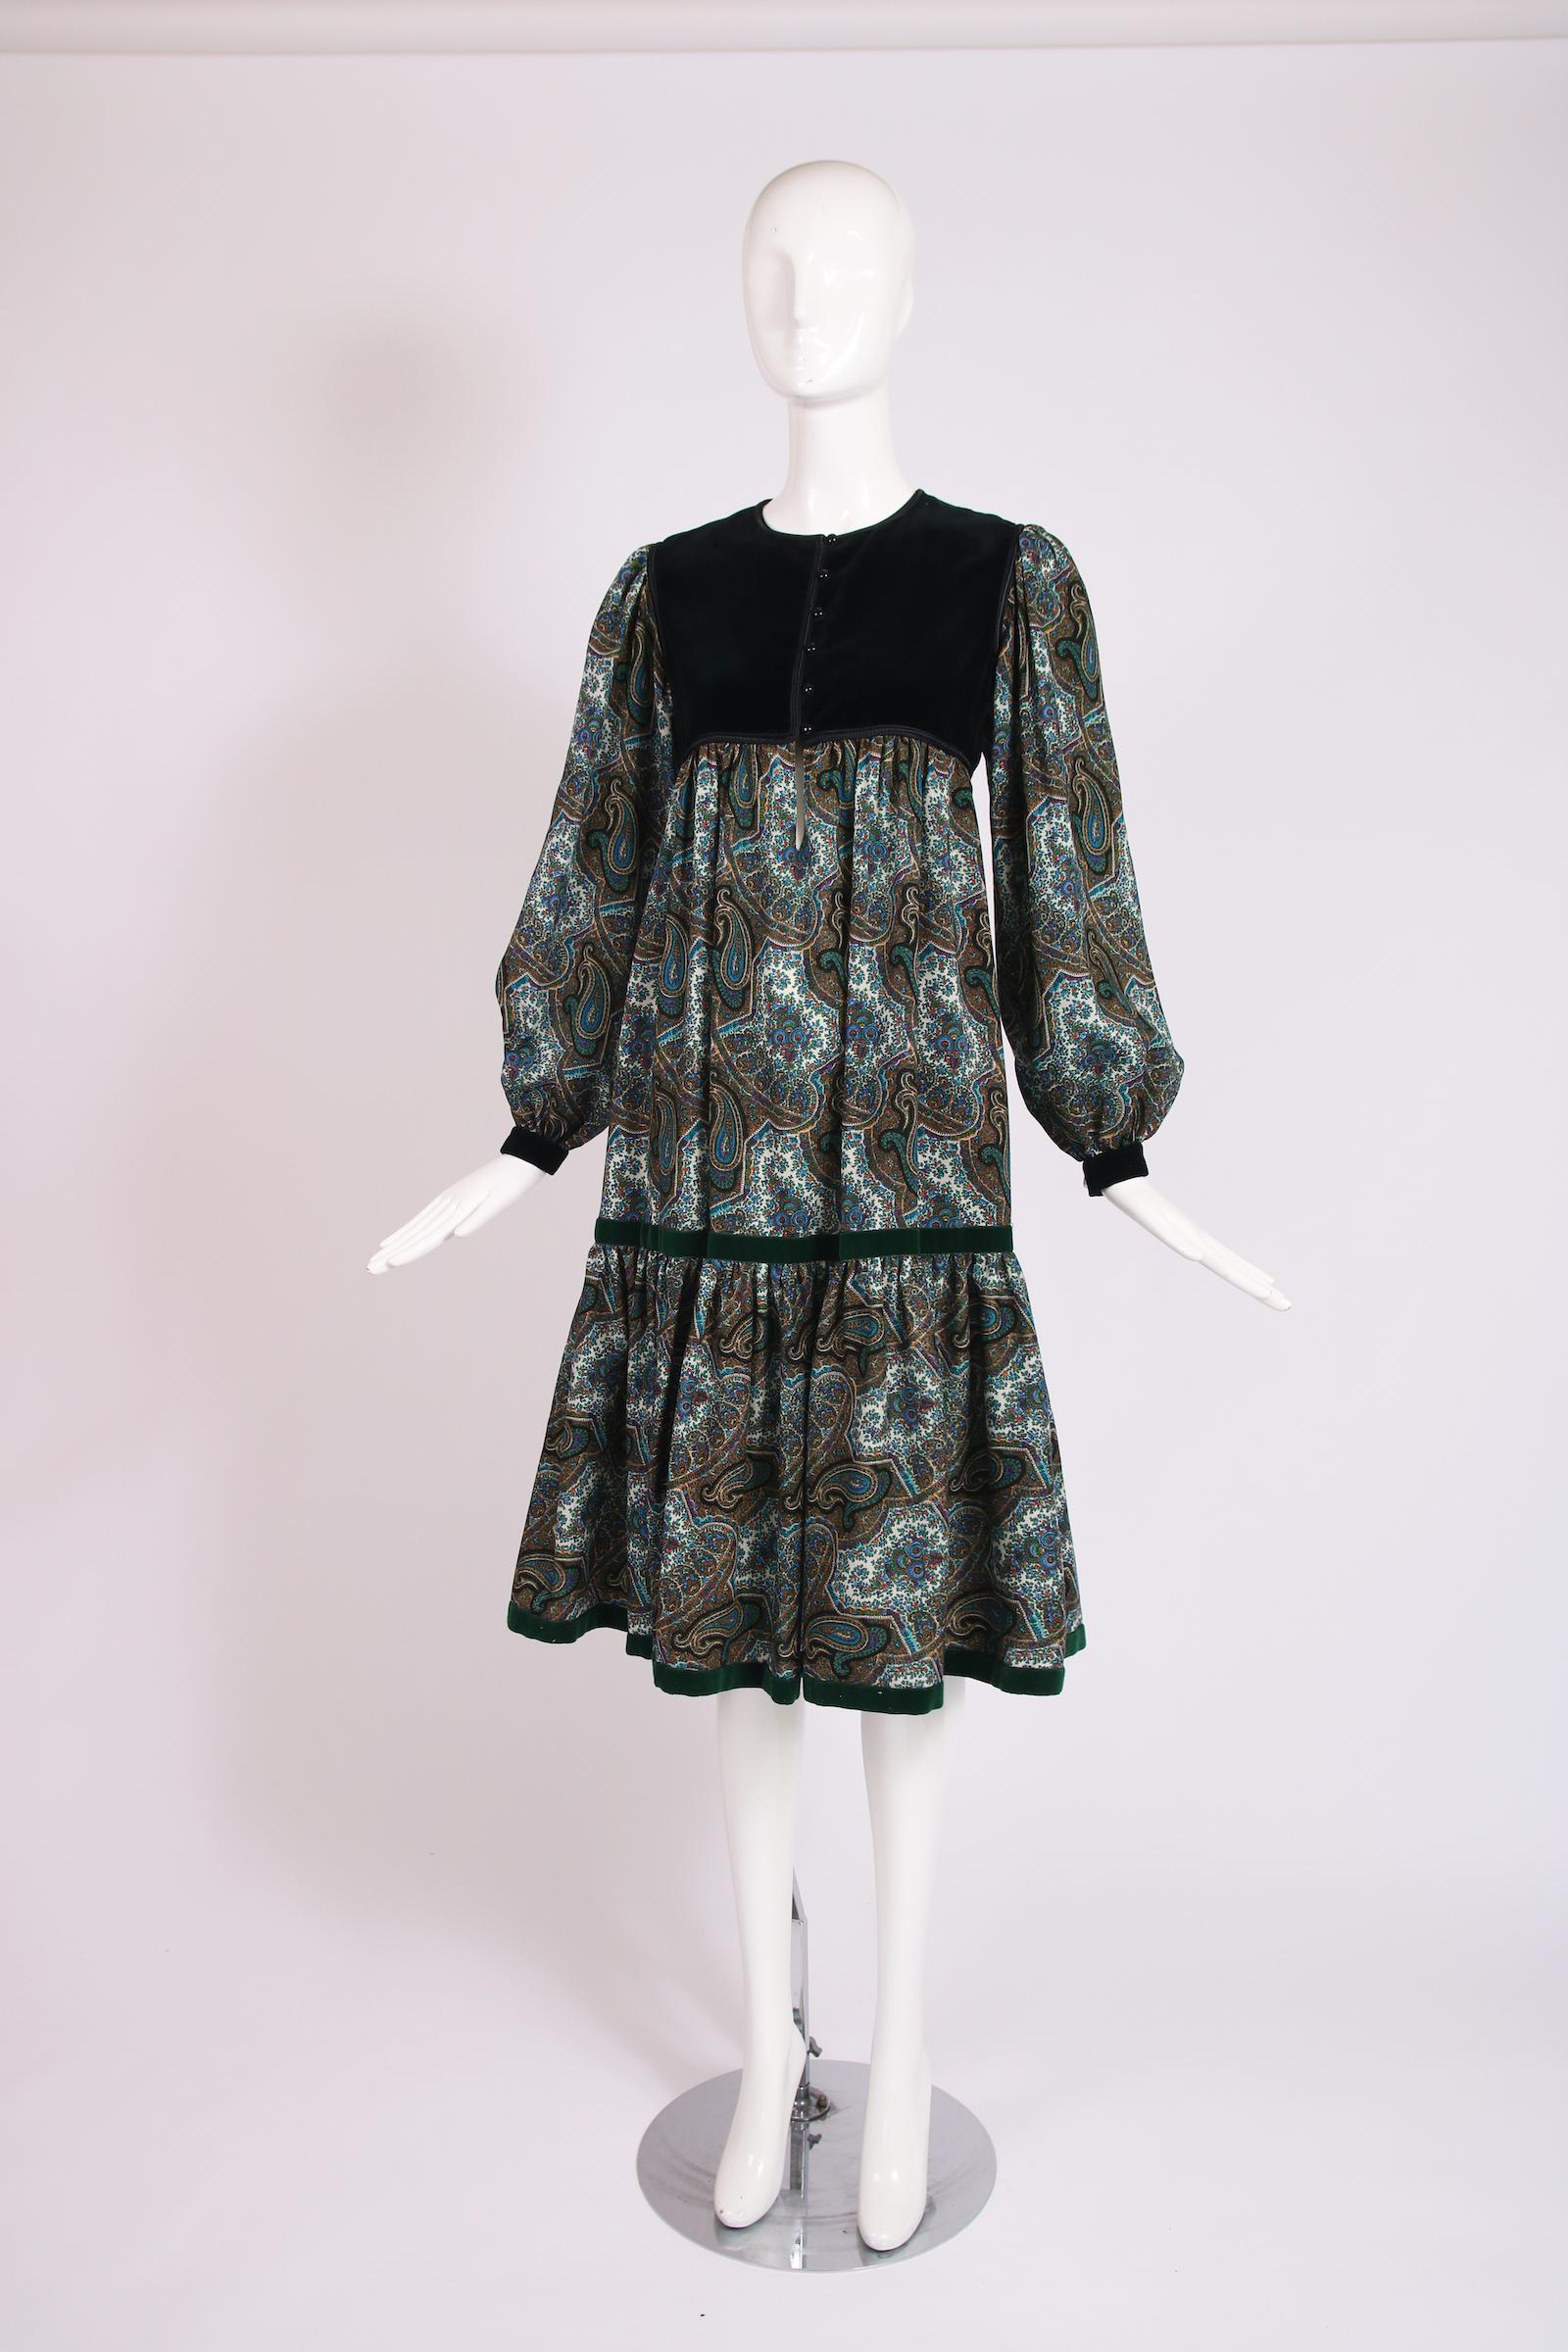 1976 Yves Saint Laurent paisley print wool tiered dress with black velvet smock and green velvet trim. In excellent condition - size tag 36. Please consult measurements - bust and top of ribcage measurement is VERY small. 

Shoulders: 13.5